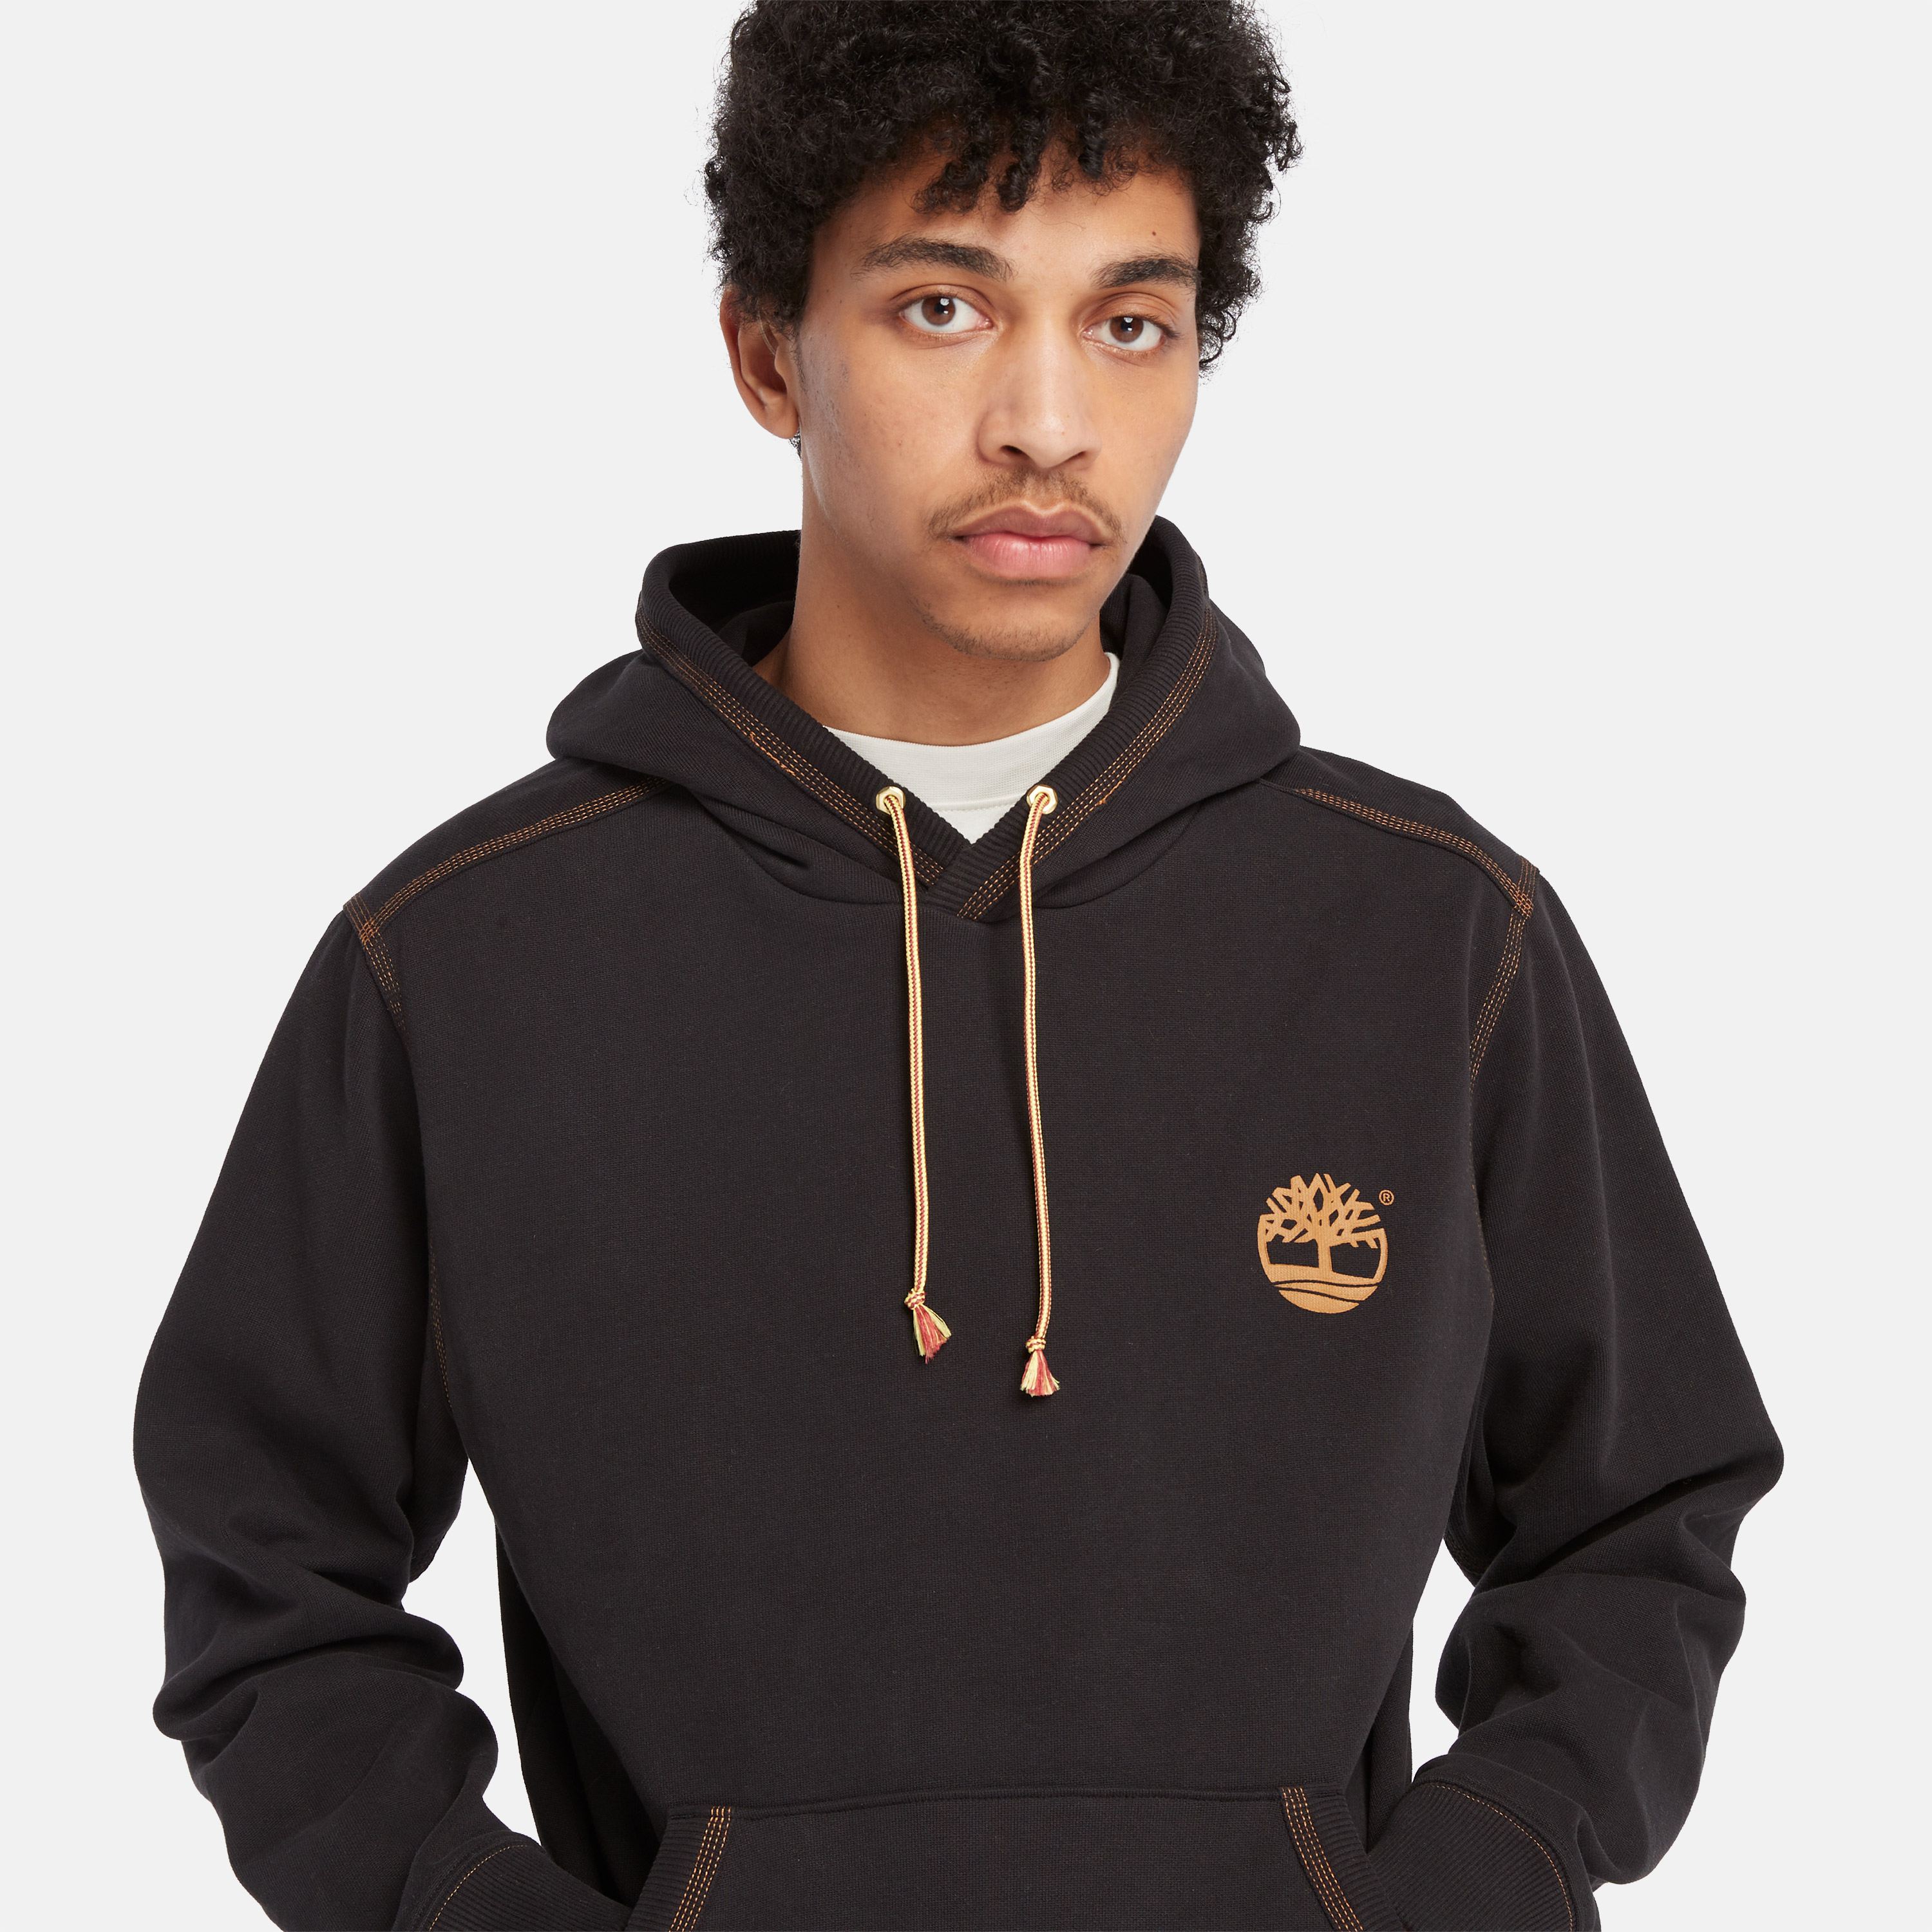 Men's Elevated Hoodie - Timberland - Malaysia